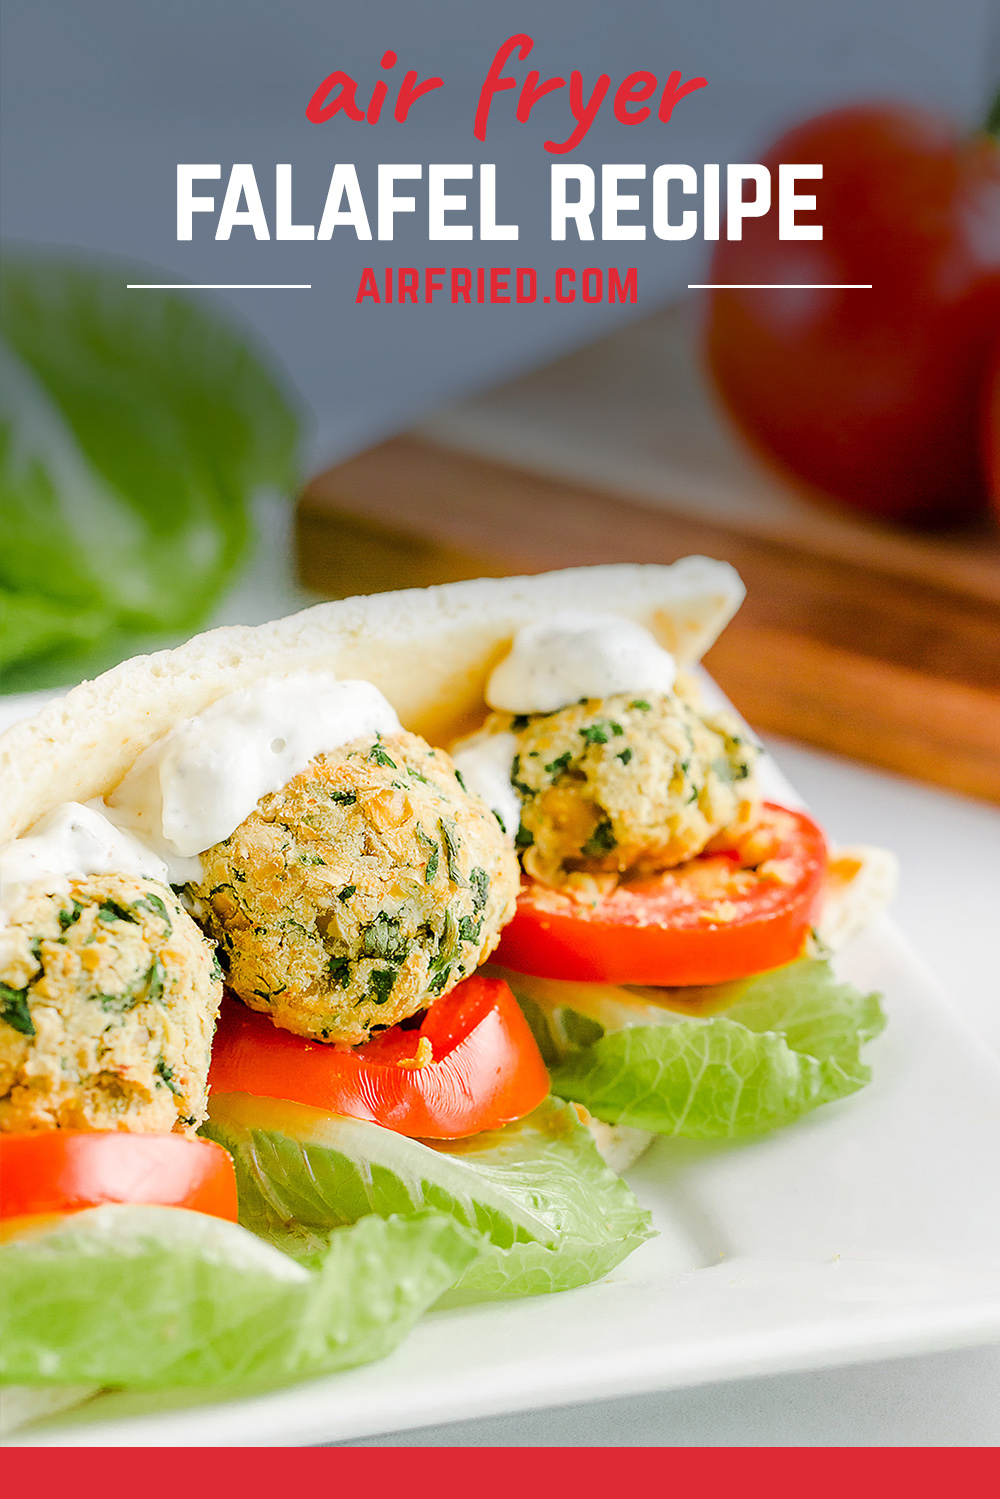 These homemade falafels stay together really well in the air fryer and turn out to be an amazing vegetarian lunch!  #nomeatmonday #airfryer #recipes